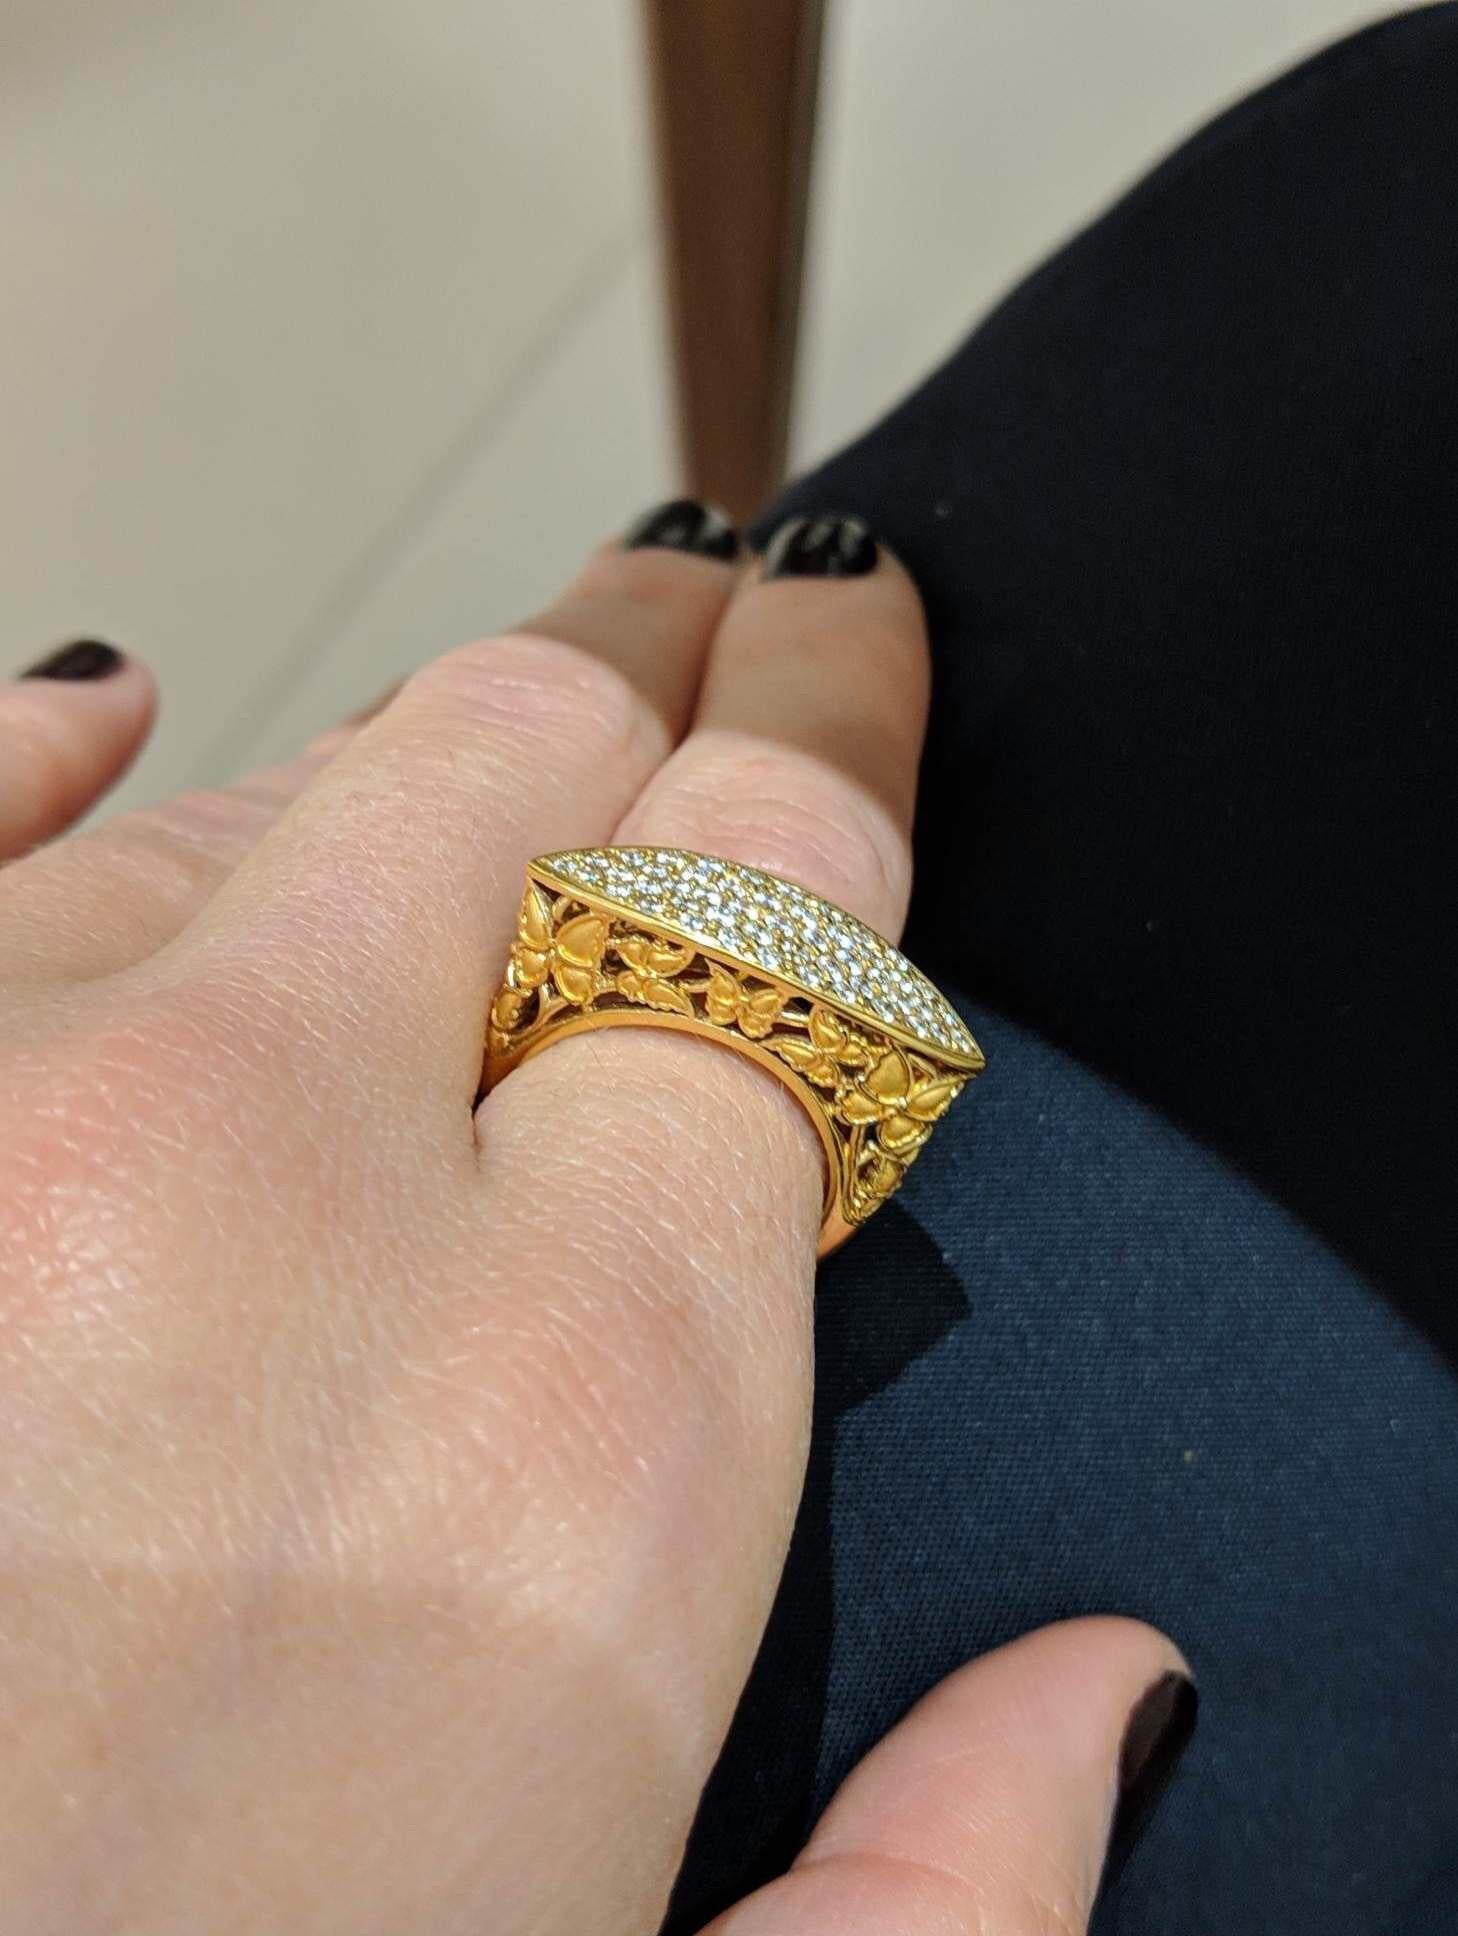 Carrera Y Carrera has built its its famous name on figurative designs, an obsession with surface finishes, and a compelling way of seeing beauty in art and nature. This 18 karat yellow gold ring is a perfect example of Carrera's iconic designs. The